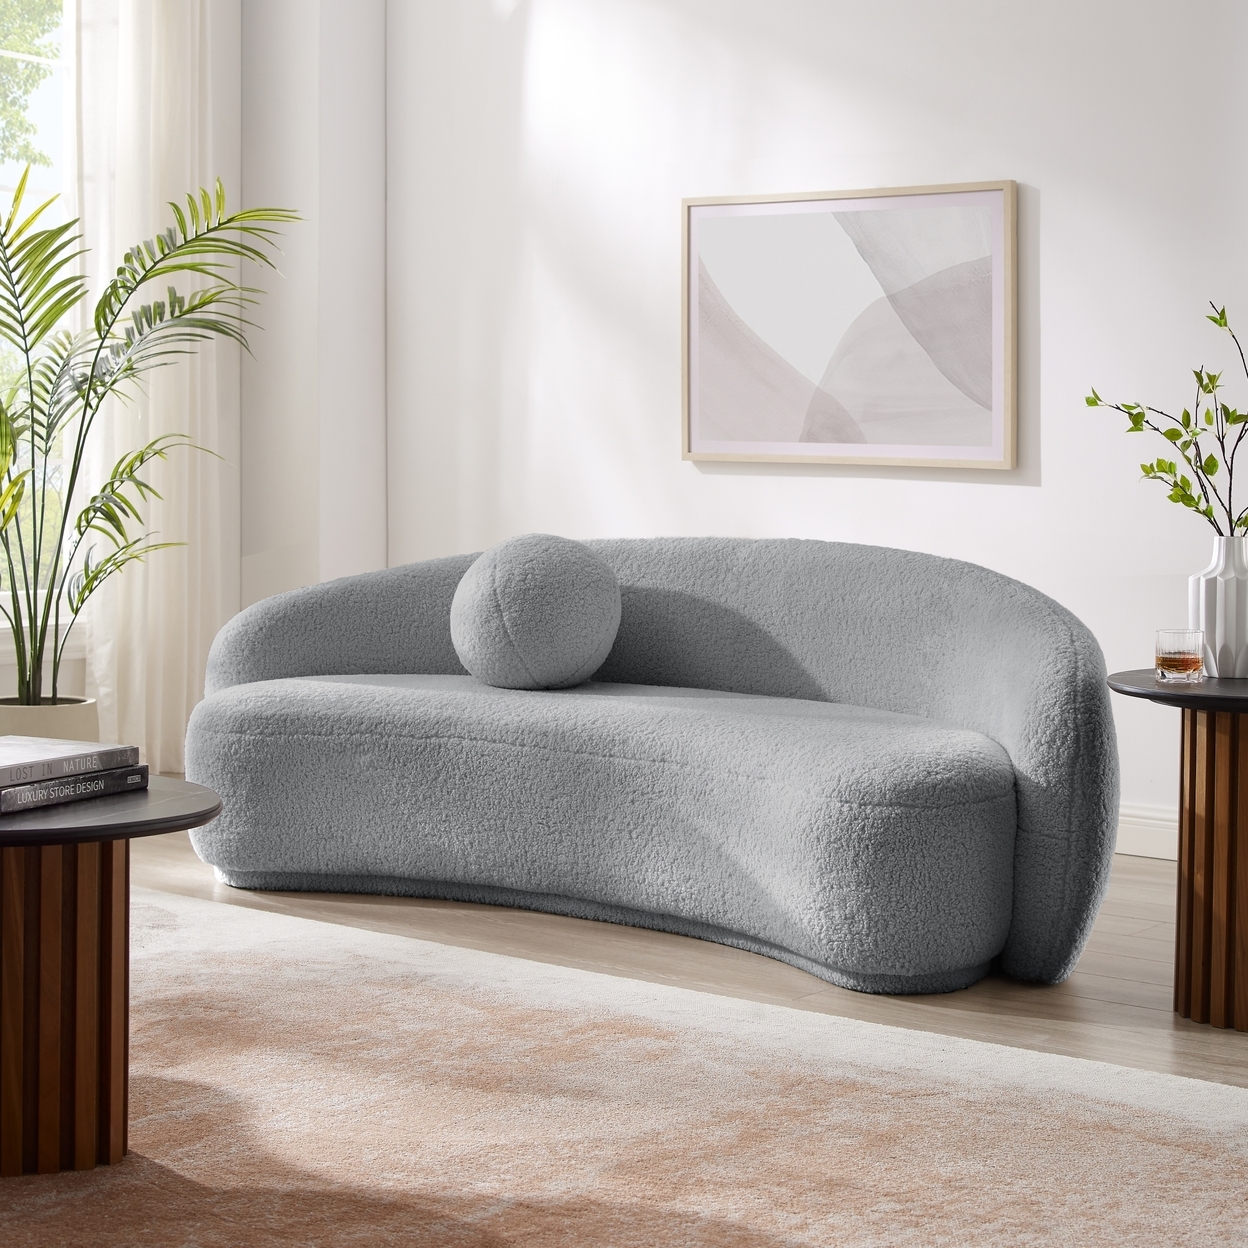 Coralyn Sofa - Upholstered, Rounded Design With Sloped Sweeping Arms,cloud-like Look, Accent Pillow Ball - White